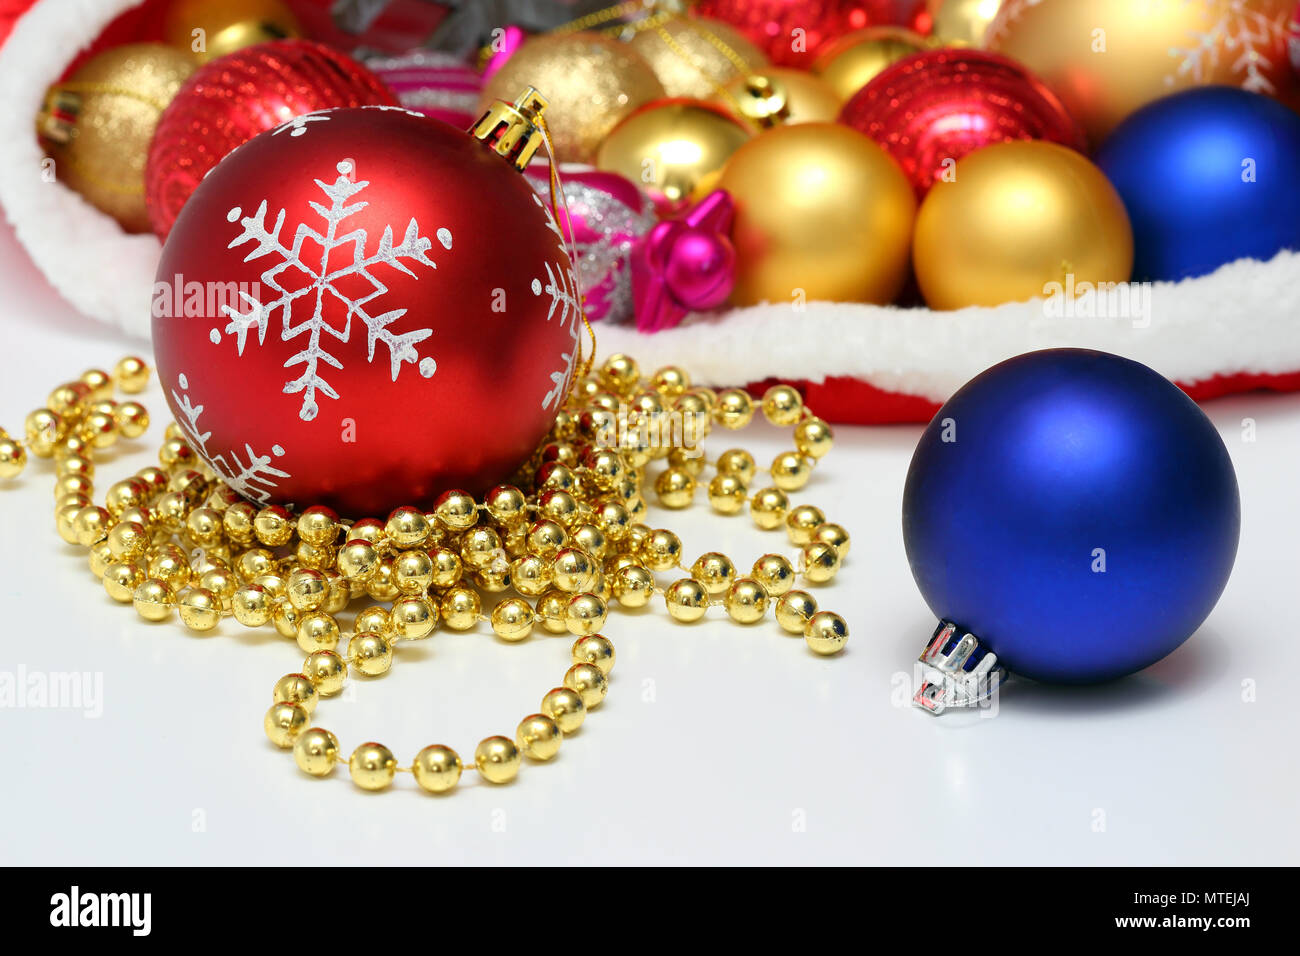 Christmas balls, toys, garland in red bag Stock Photo